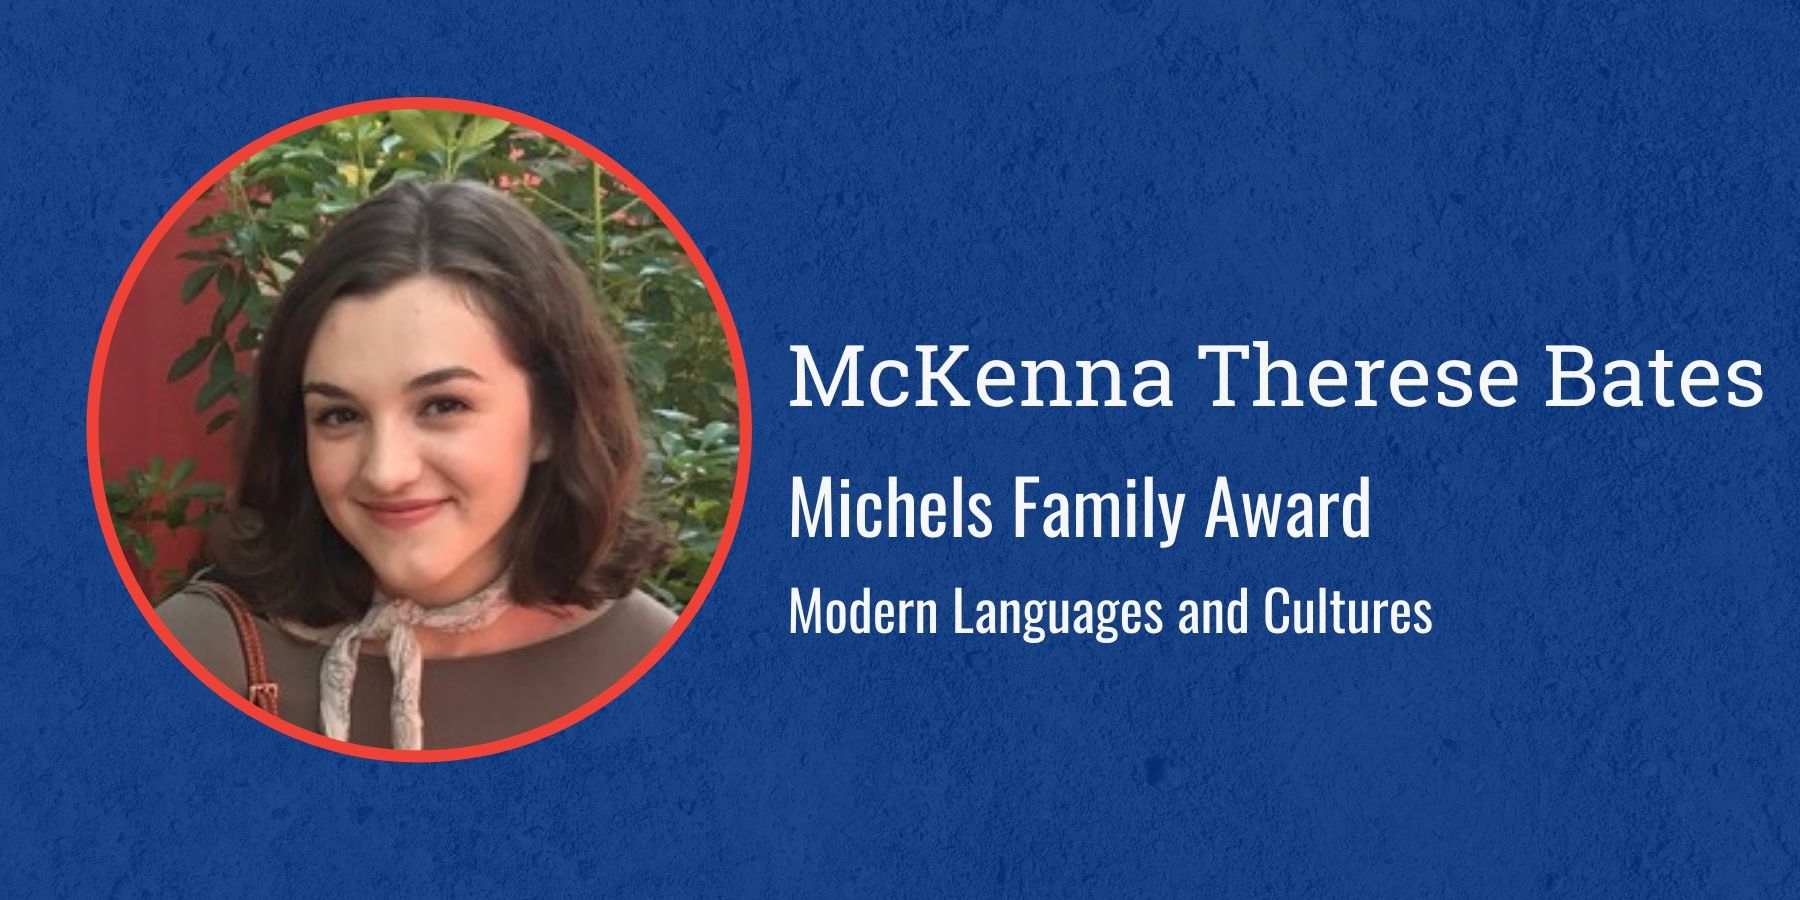 Photo of McKenna Therese Bates and text Michels Family Award Modern Languages and Culture